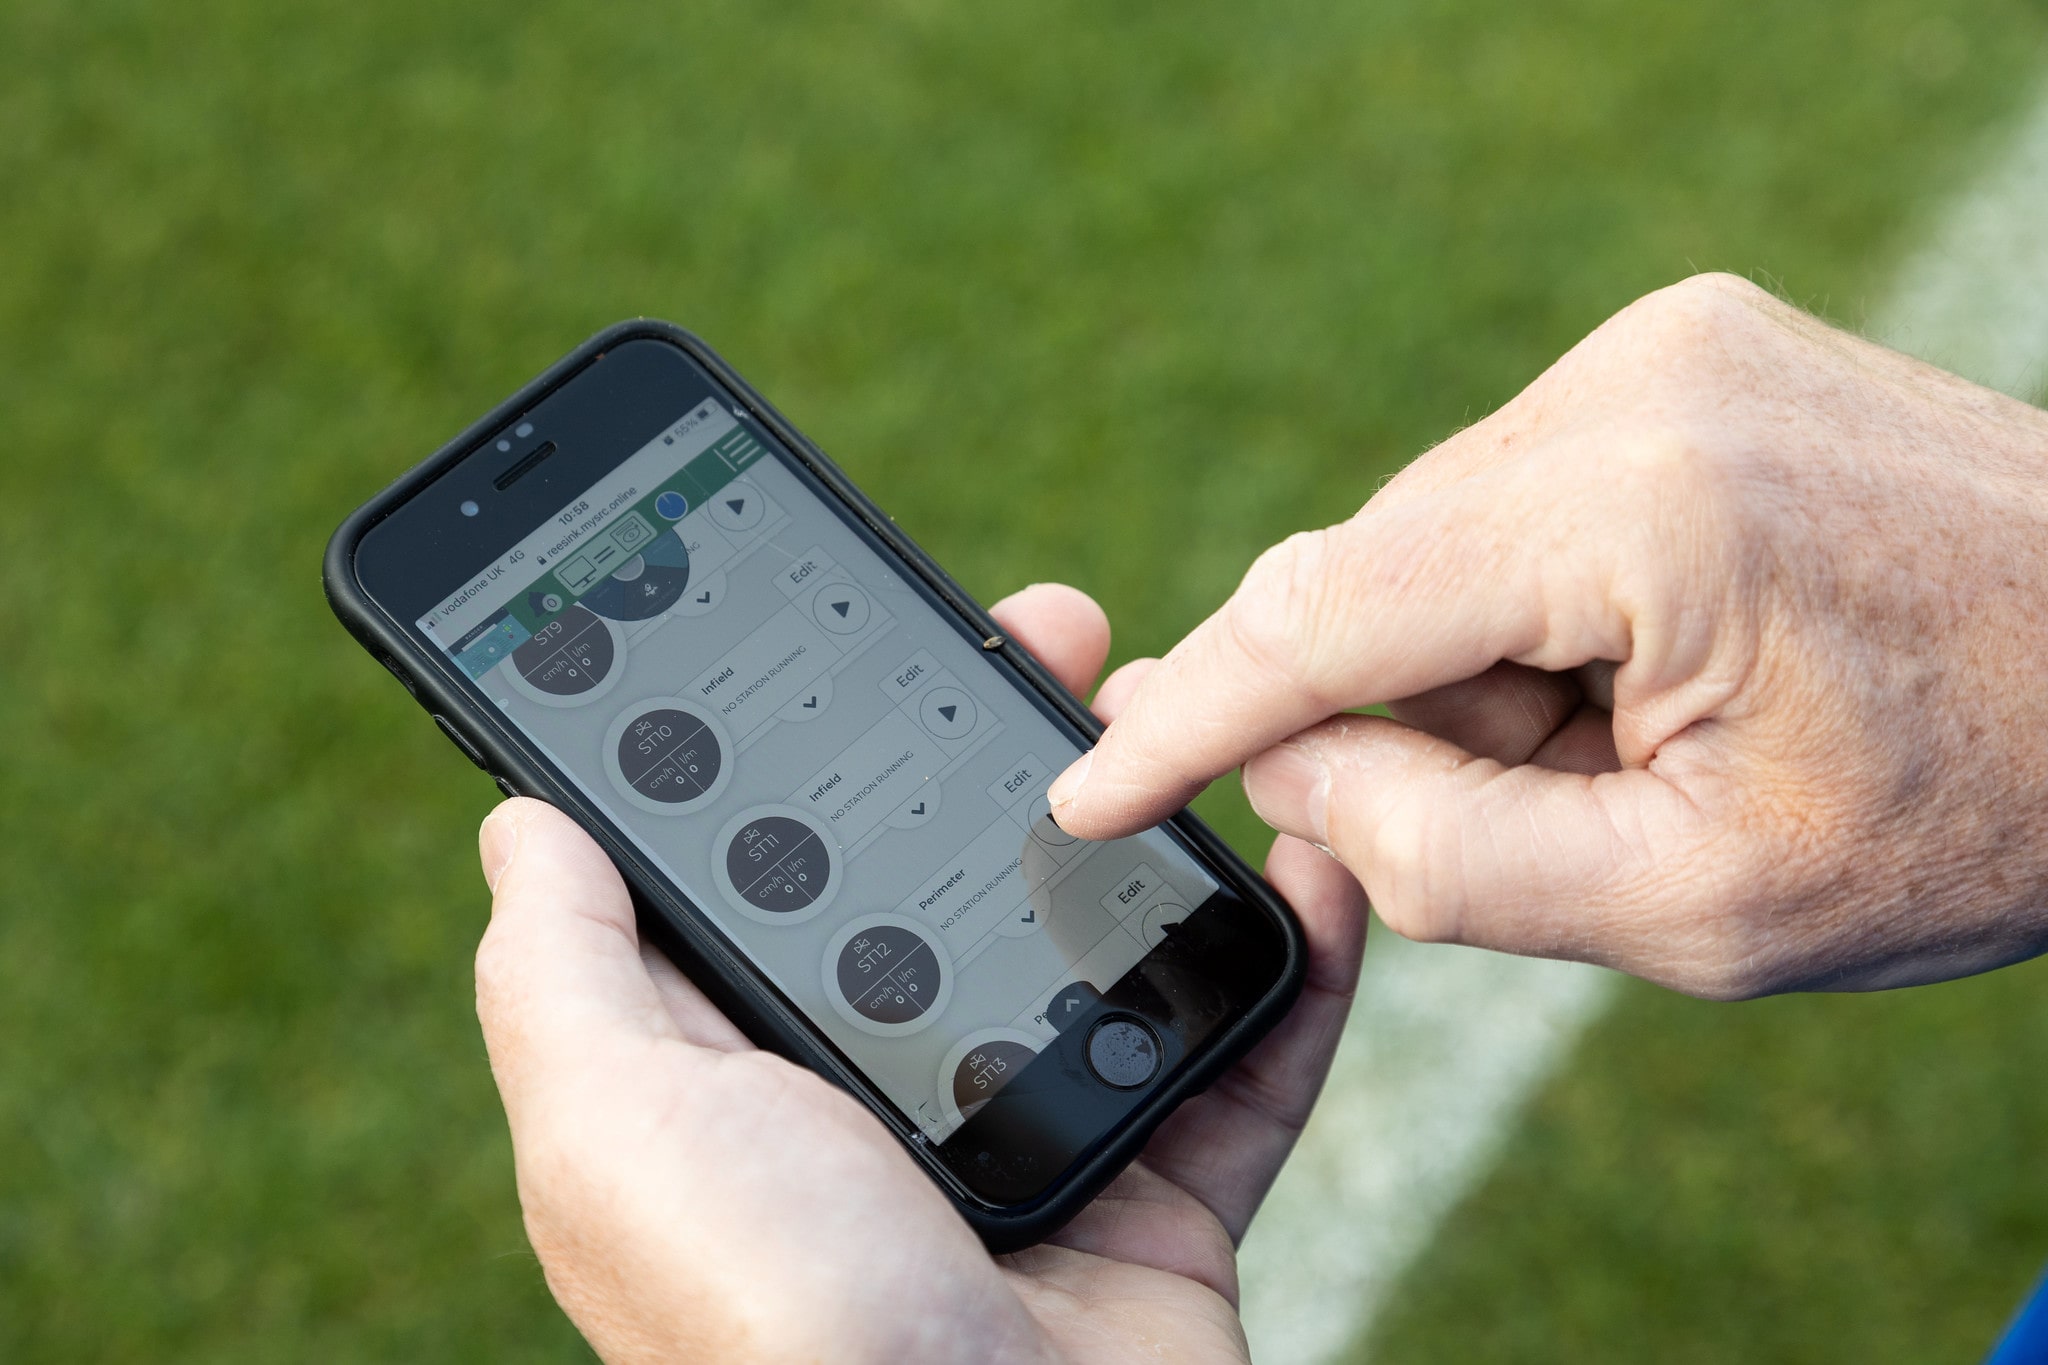 A close up of a mobile phone, the user is accessing the SRC irrigation controller through an app, adjusting infield sprinklers.